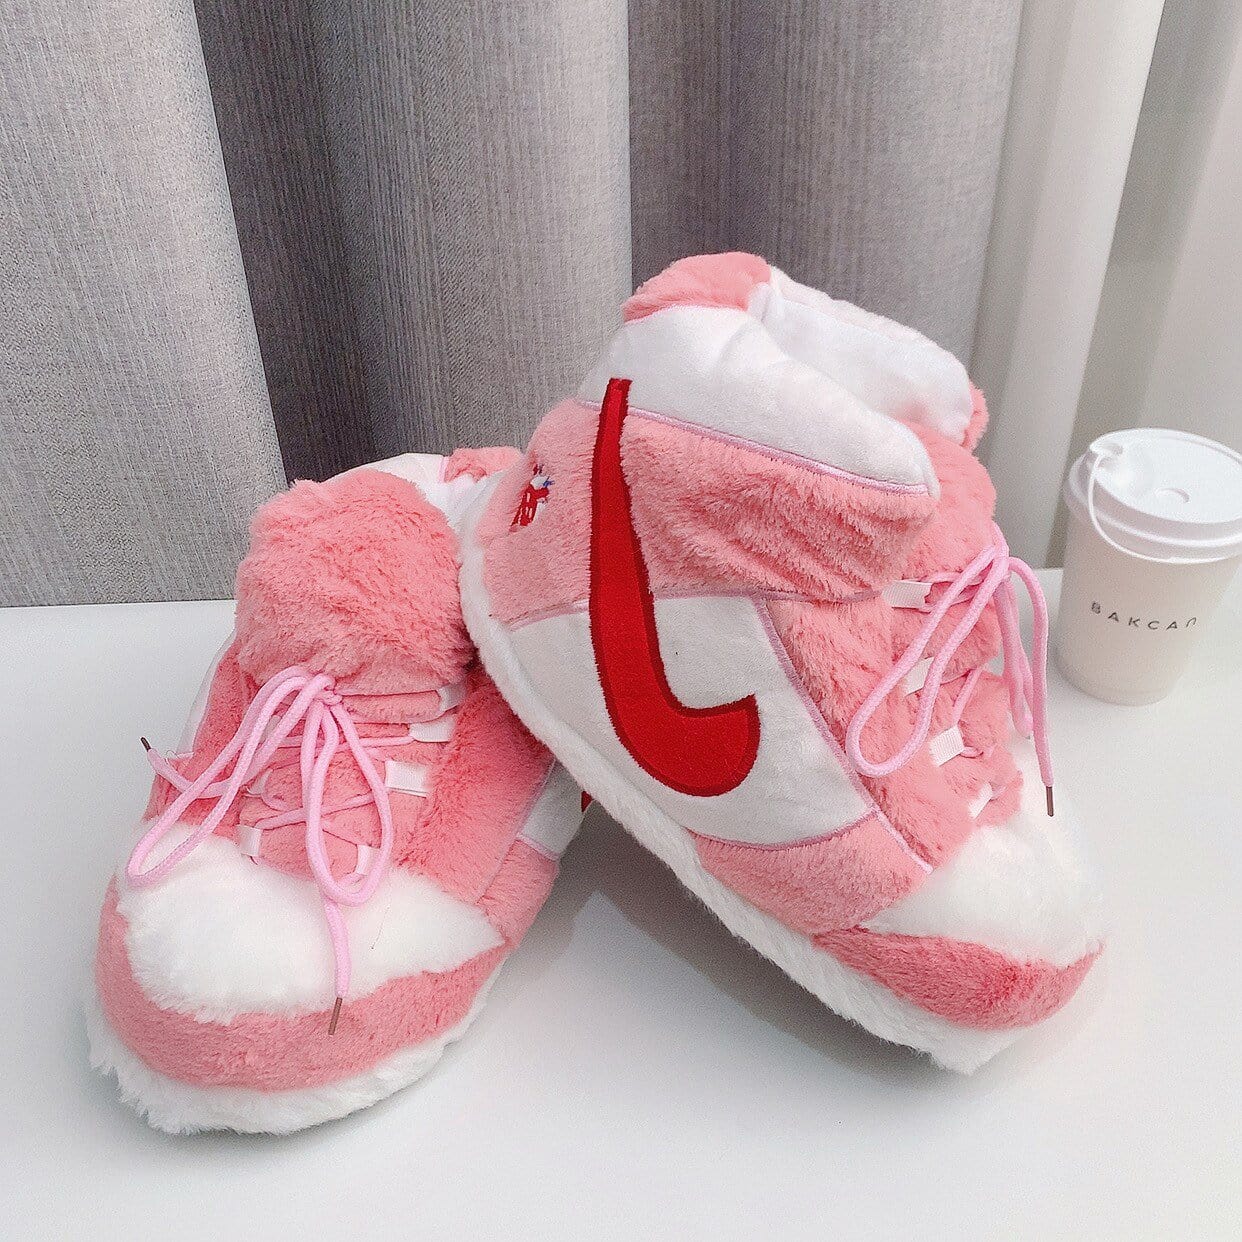 Slip Kickz  Slippers One Size Fits All (UK 3 - 10.5) / Pink Pink Inspired Novelty Sneaker Slippers